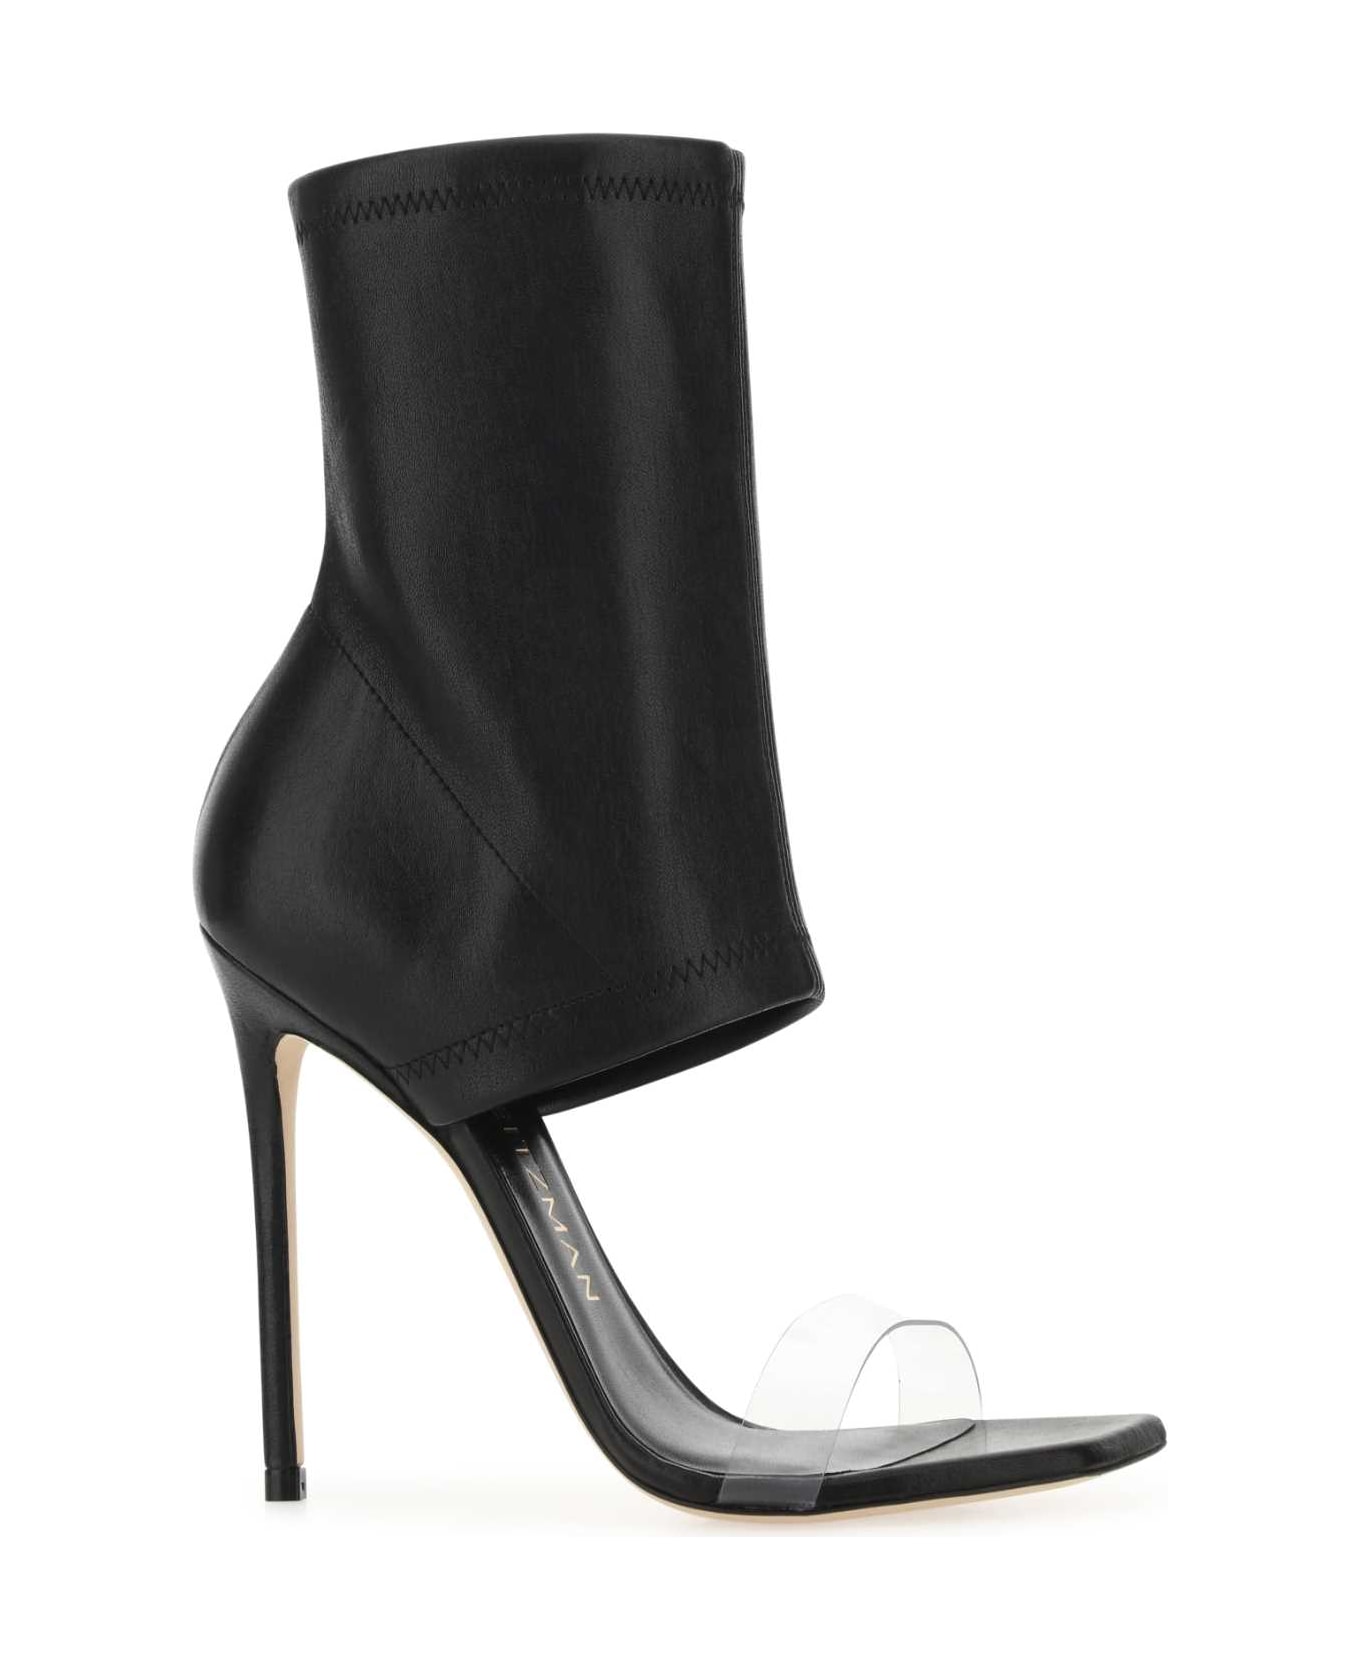 Stuart Weitzman Black Nappa Leather Frontrow Ankle Boots - BLACKCLEAR サンダル